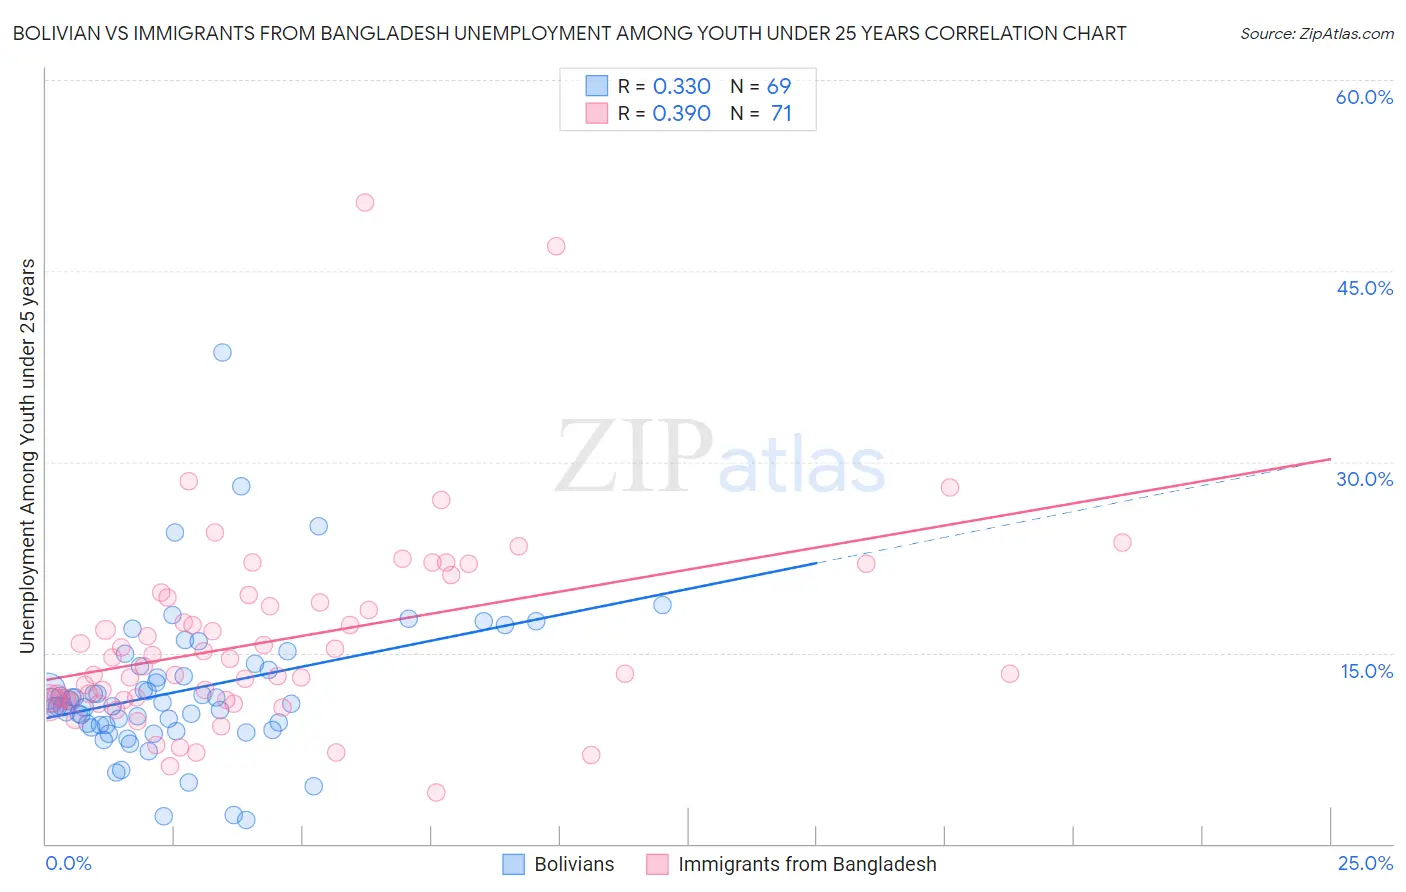 Bolivian vs Immigrants from Bangladesh Unemployment Among Youth under 25 years